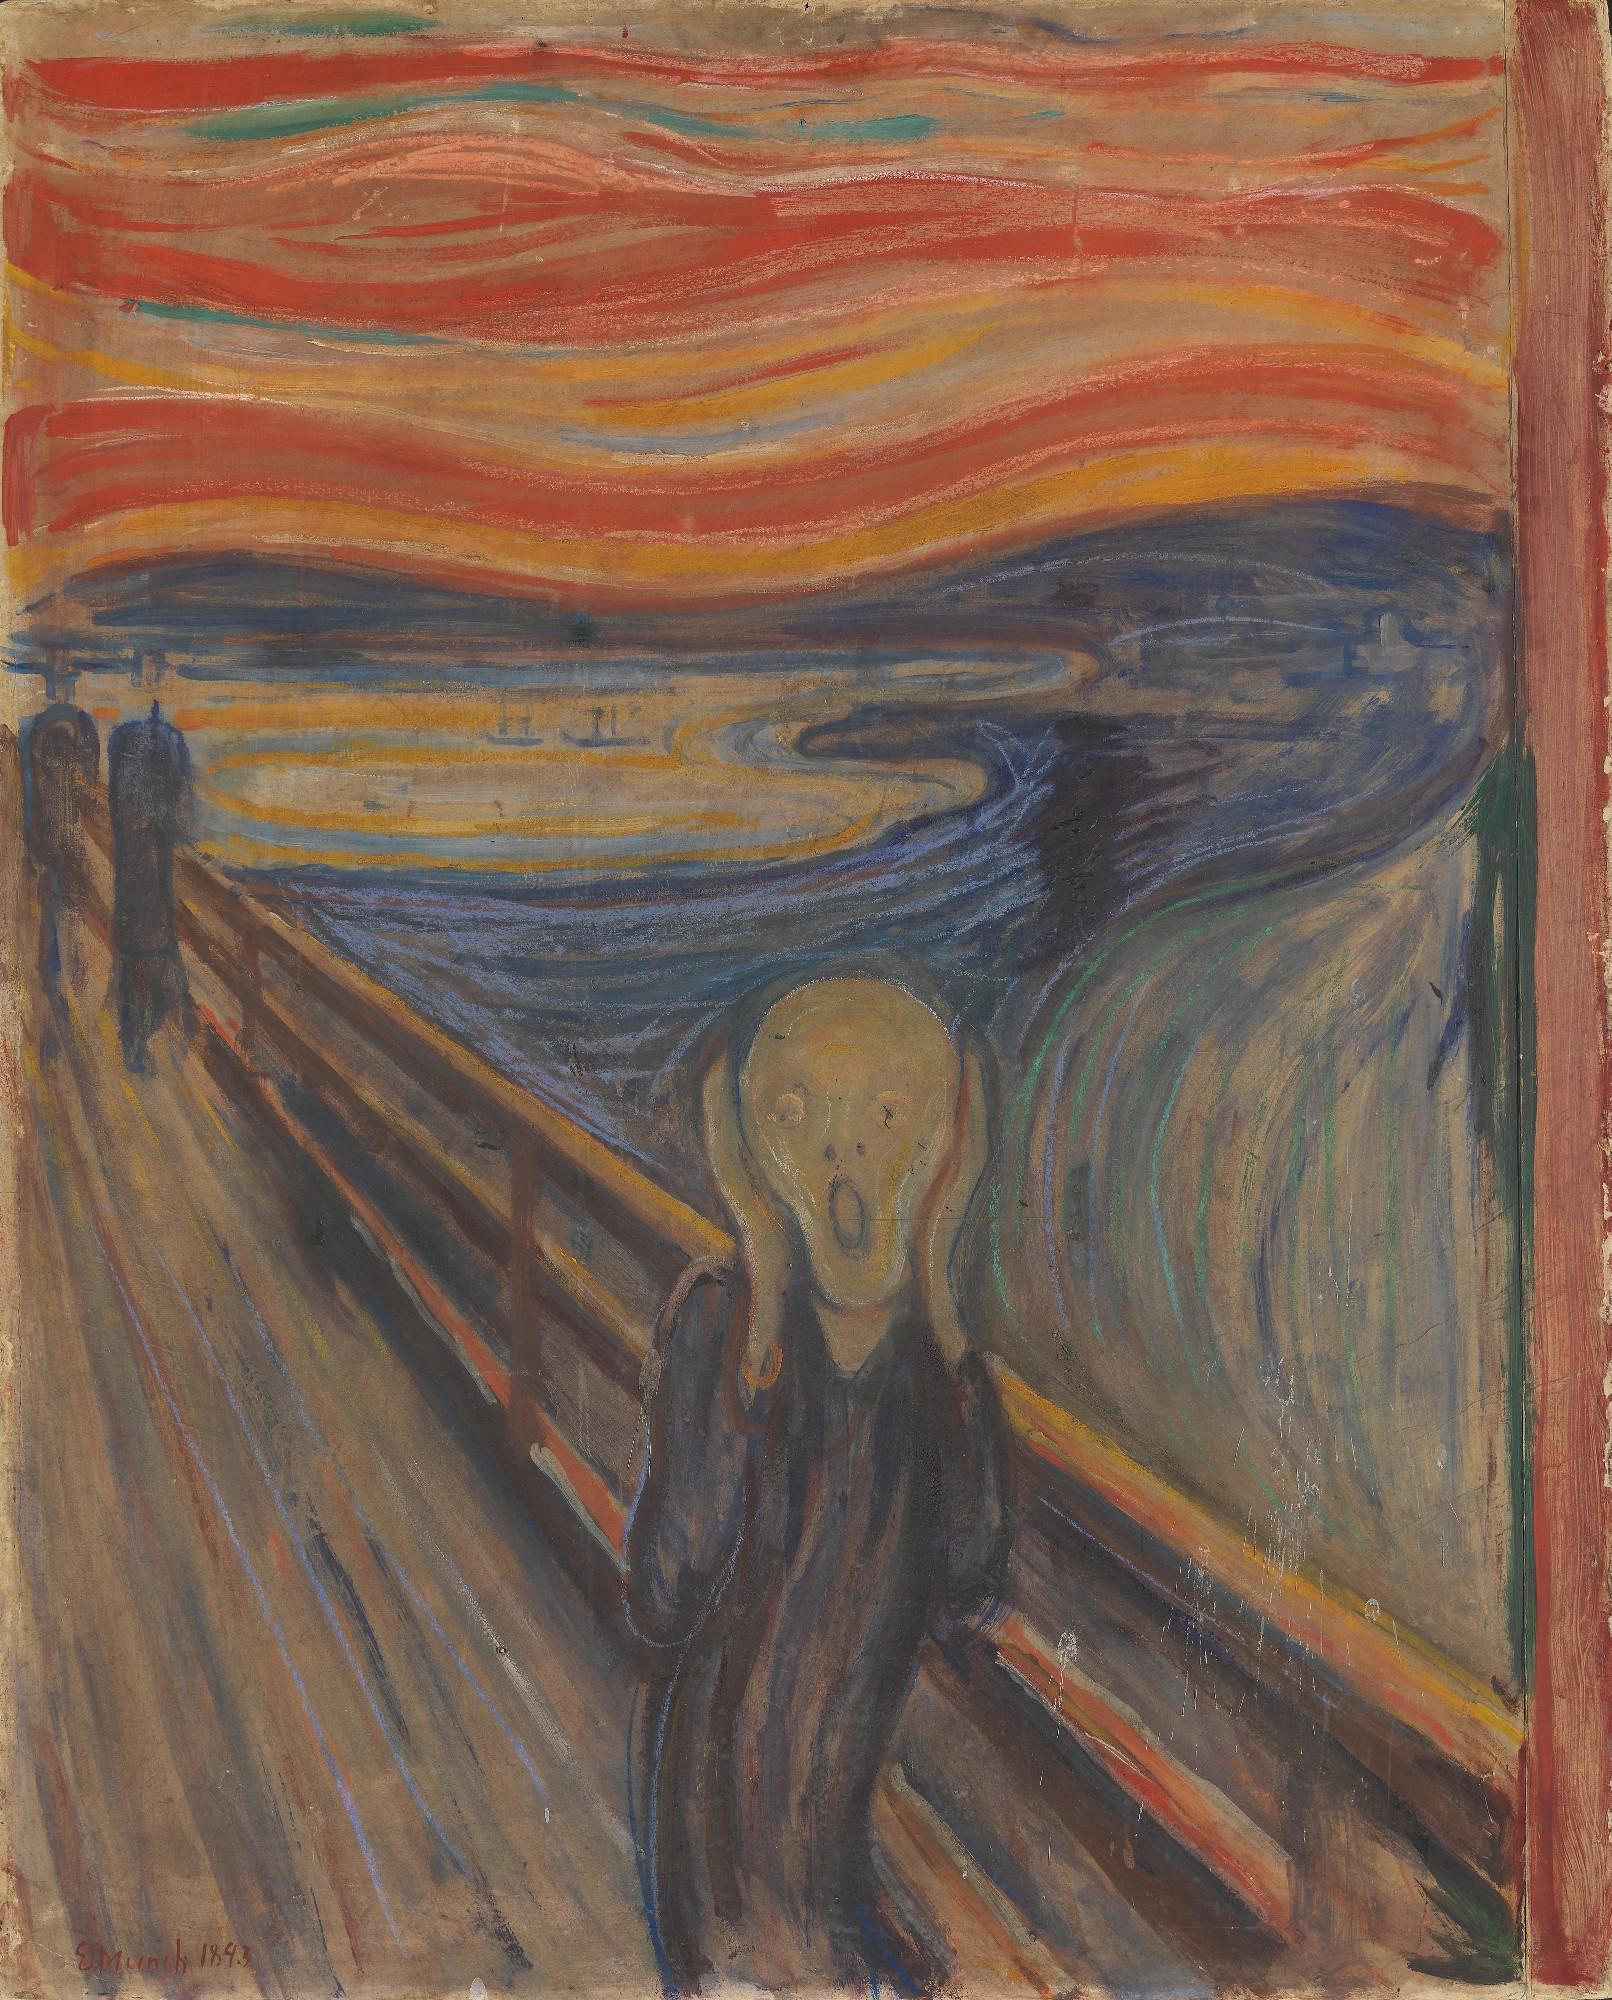 EDVARD MUNCH Art Poster or Canvas Print "Anxiety"